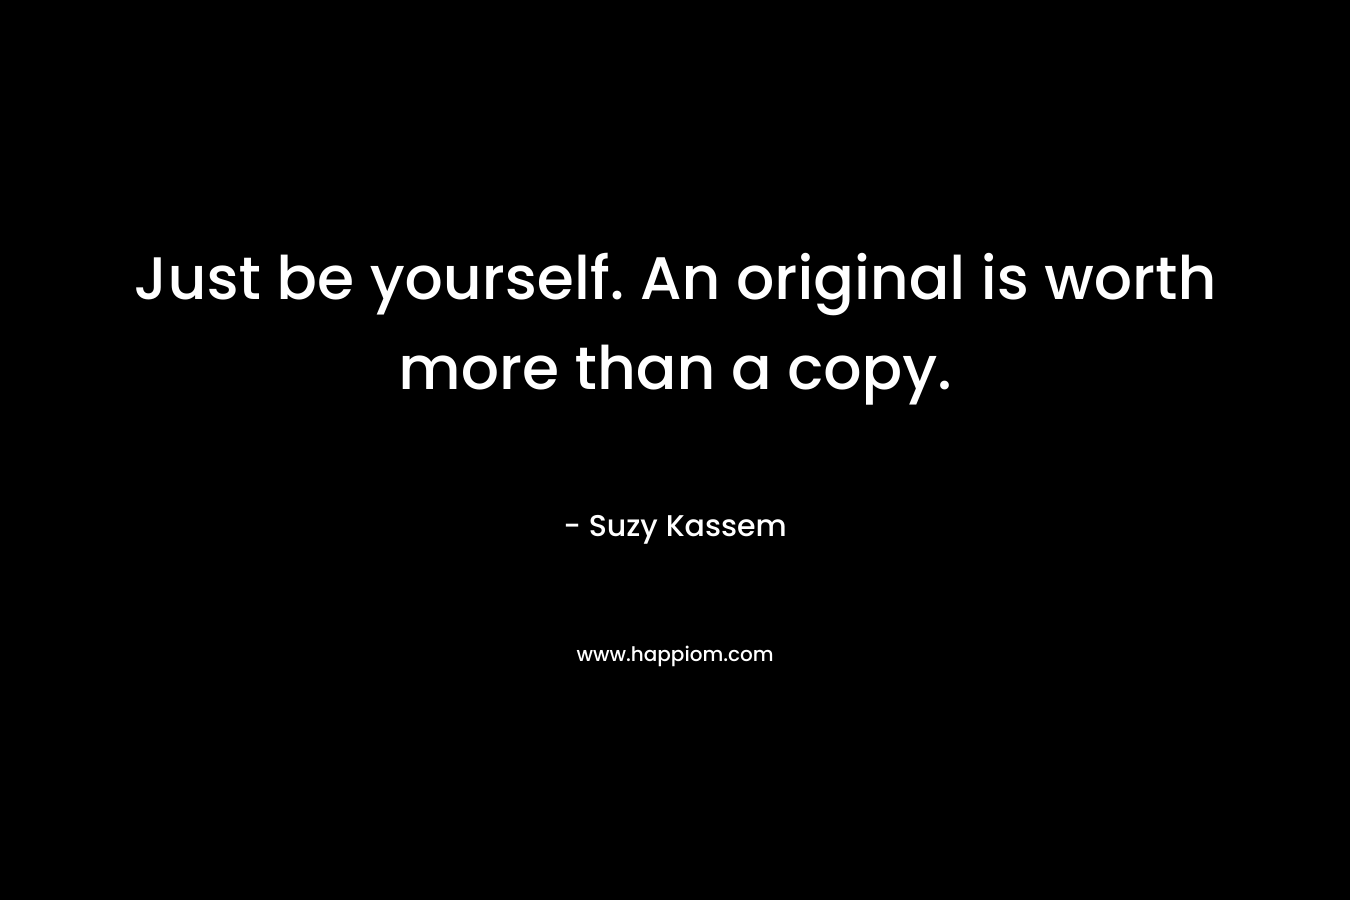 Just be yourself. An original is worth more than a copy.